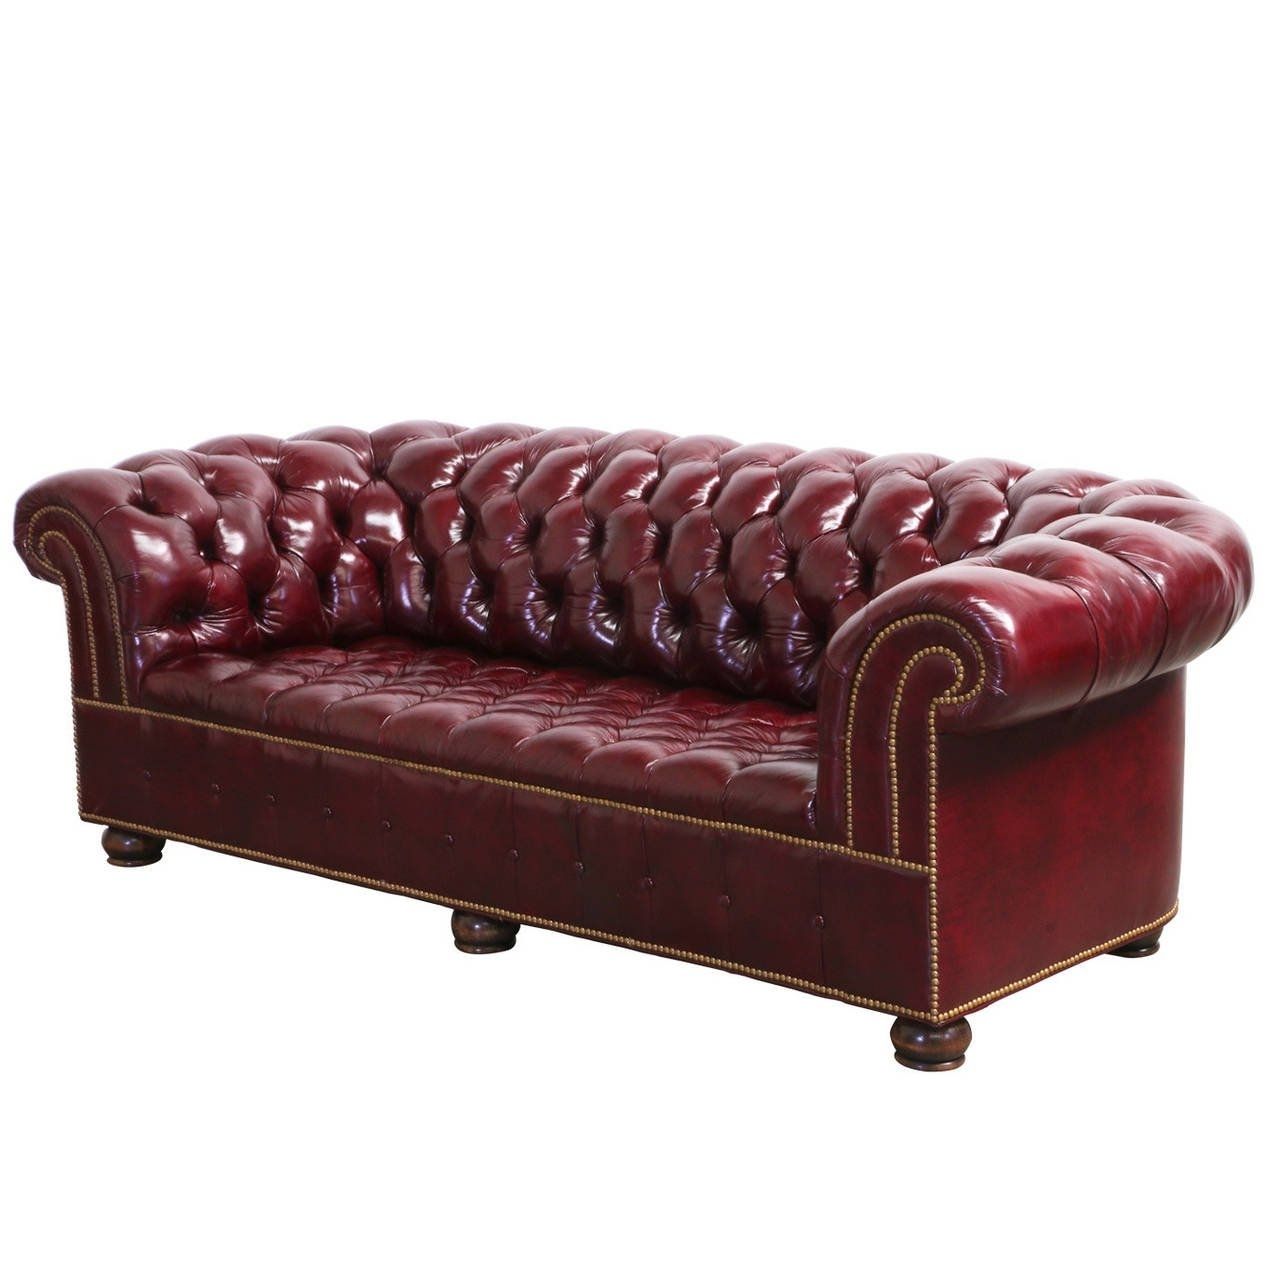 Vintage Chesterfield Sofas For Favorite Vintage Burgundy Leather Chesterfield Sofa Ideas (View 6 of 20)